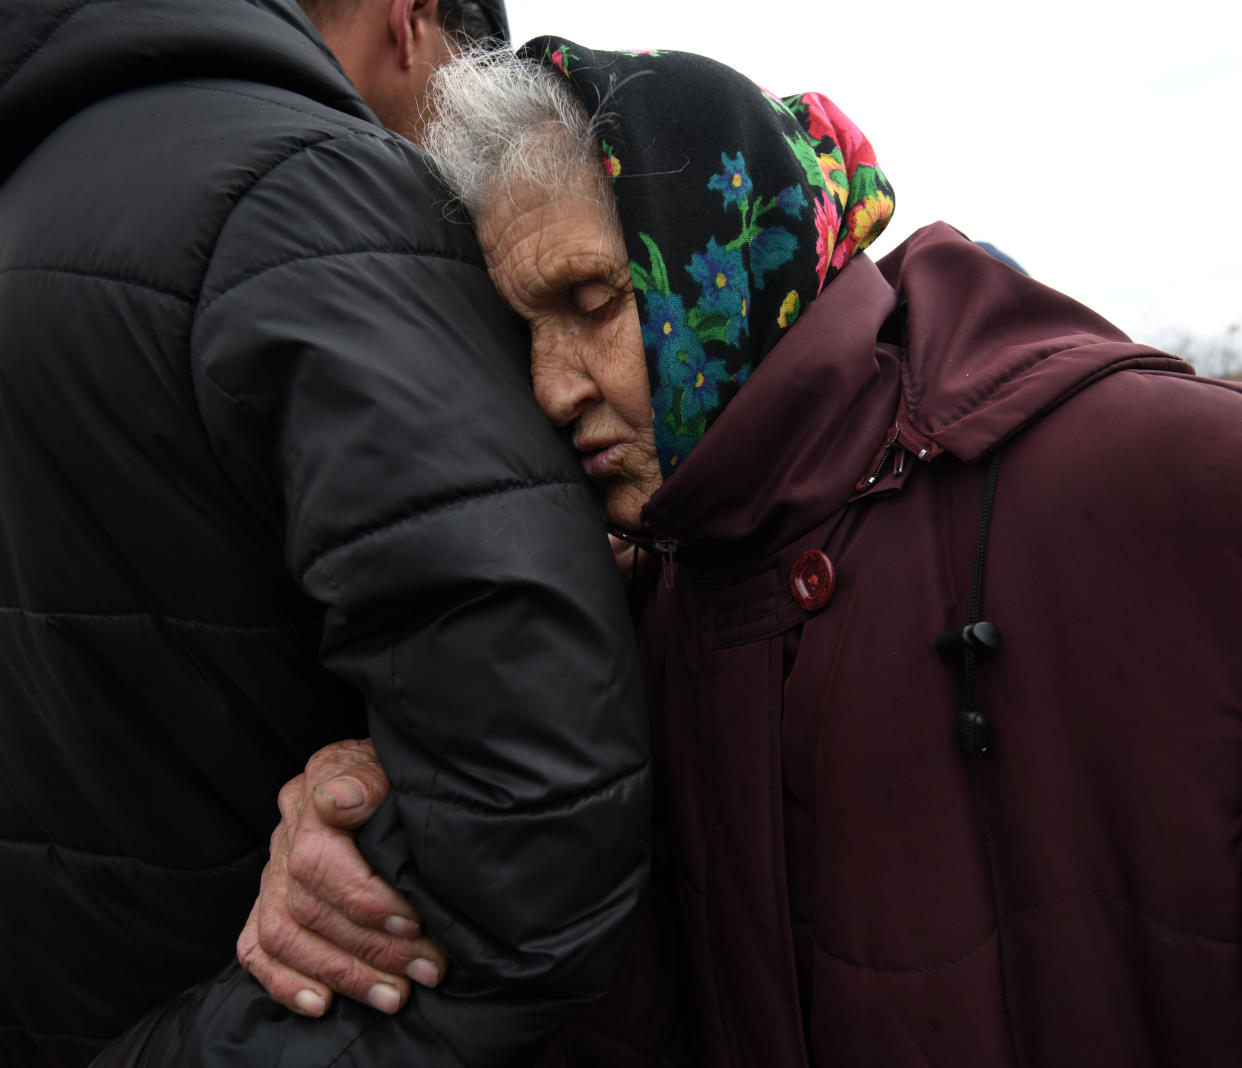 A man comforts an elderly woman in a headscarf as families search for missing loved ones in Bucha.